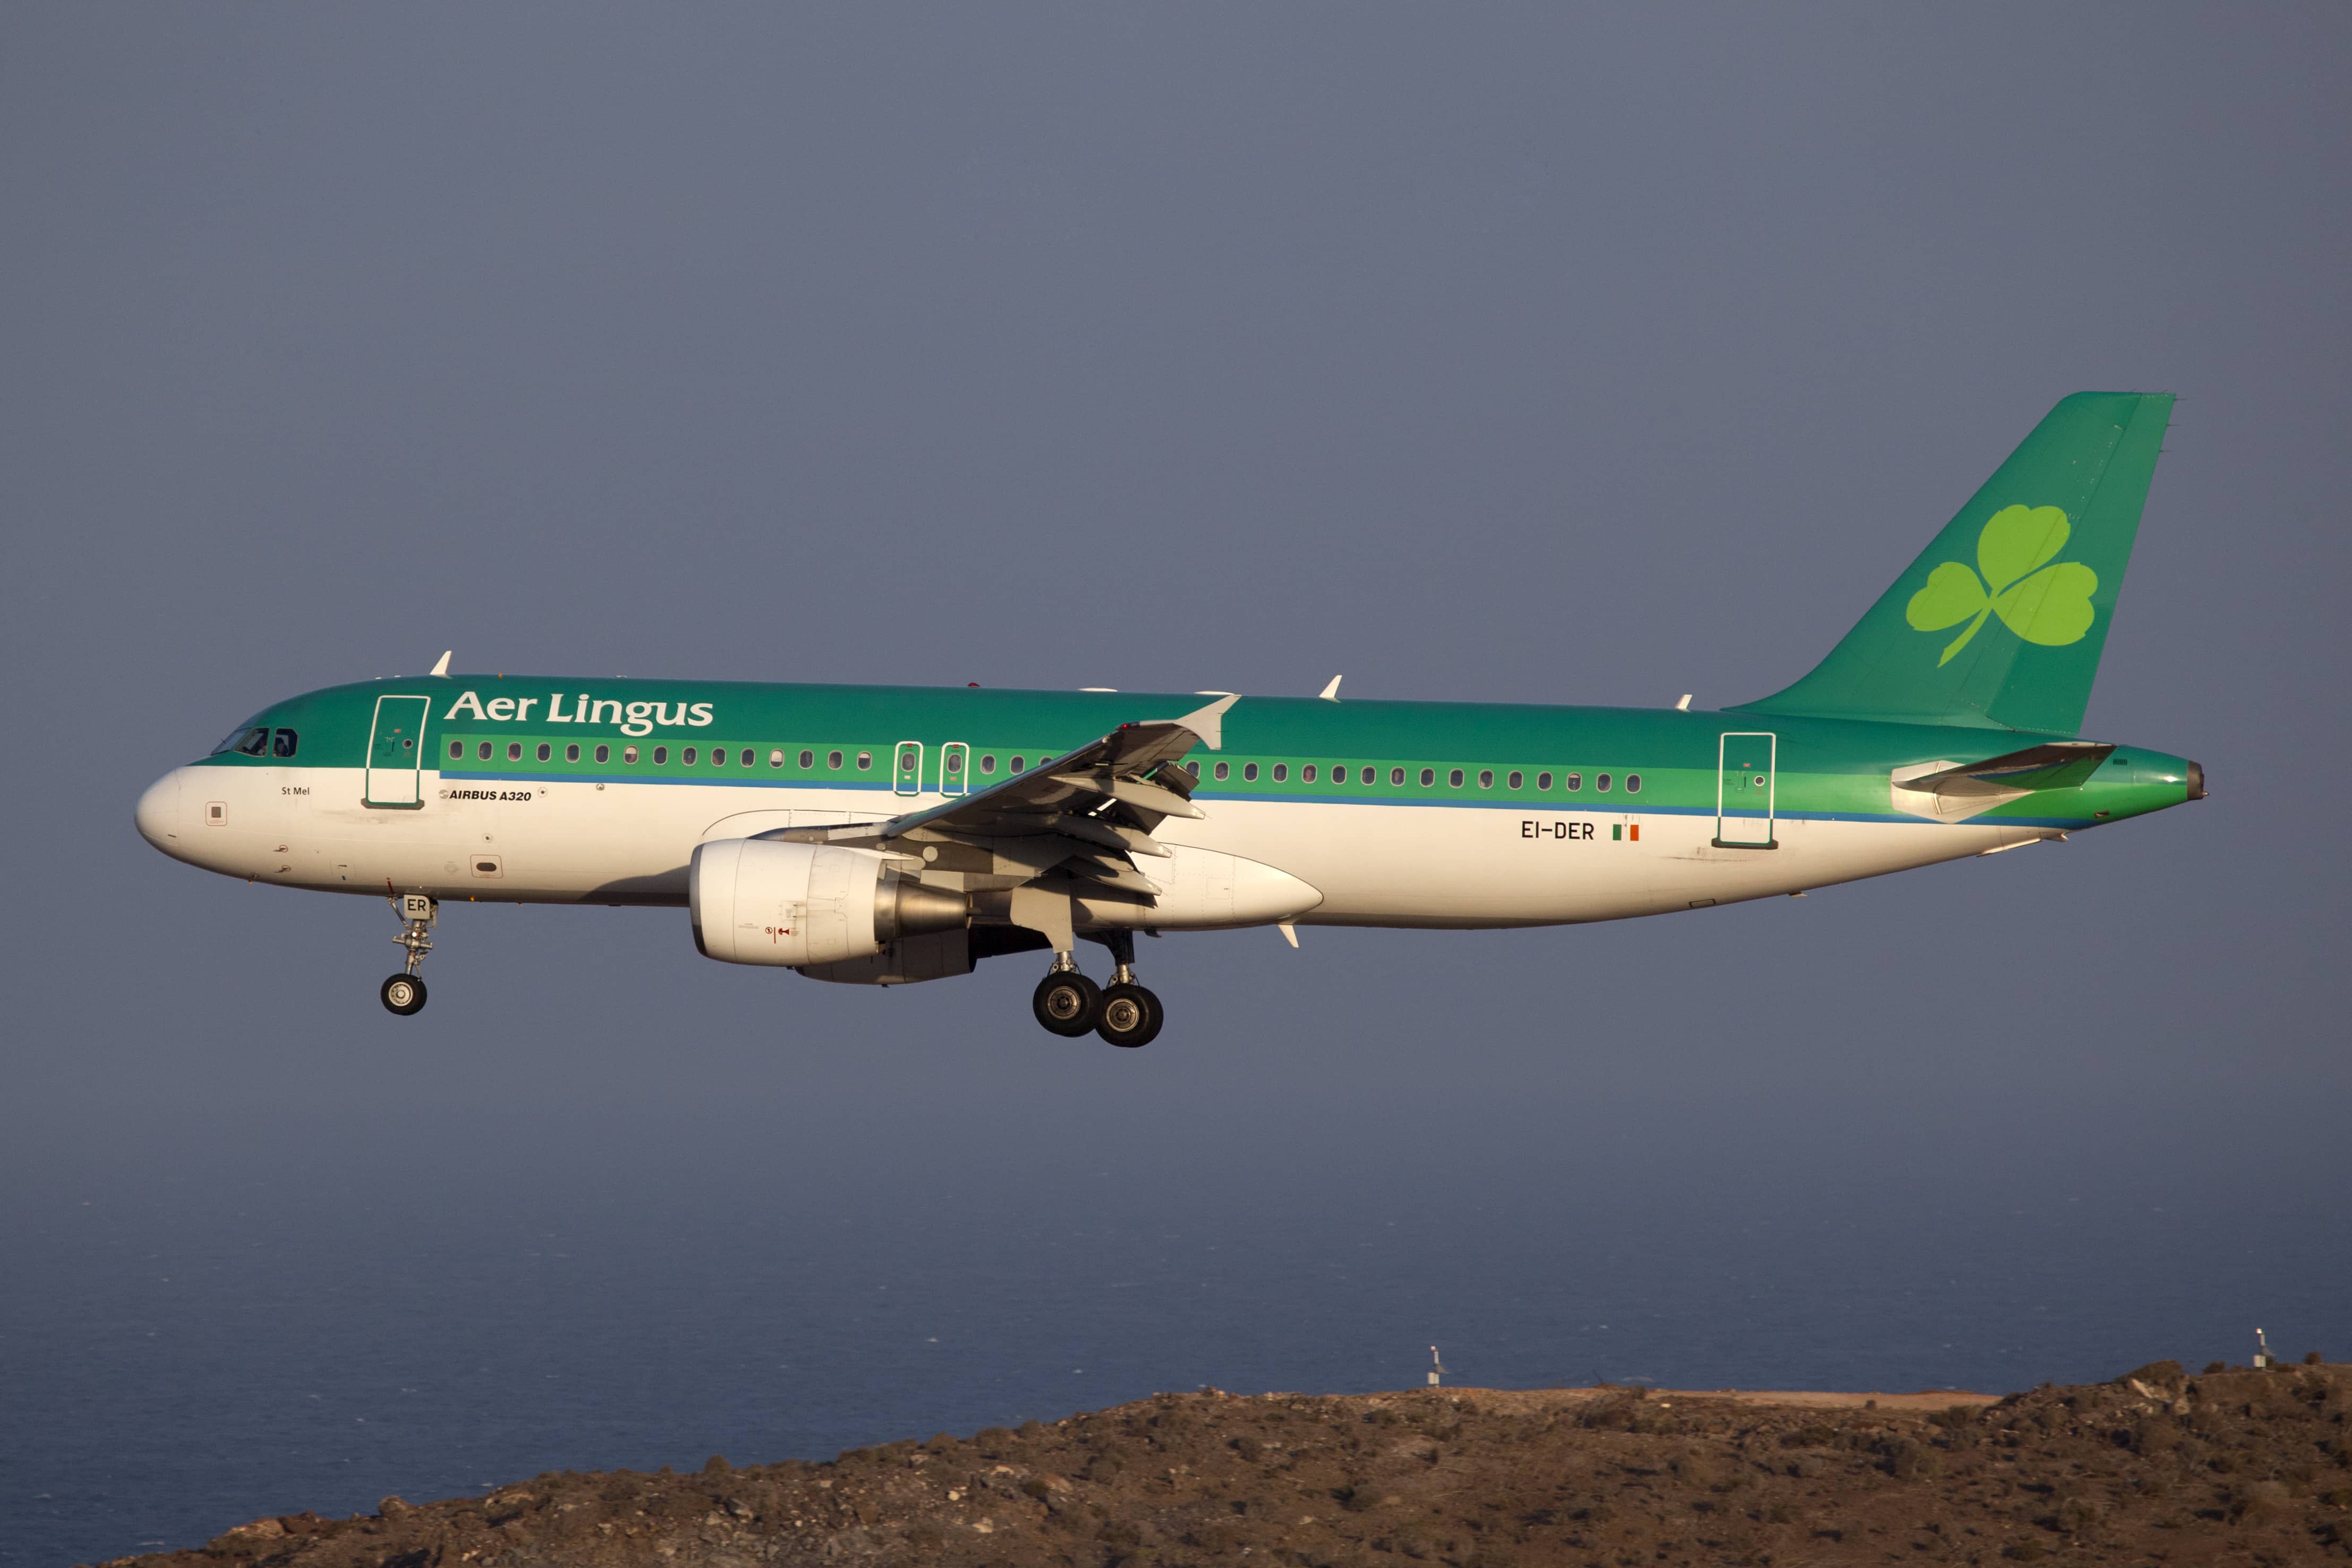 Gran Canaria, Spain - October 6, 2011: An Aer Lingus Airbus A320 on approach to the airport of Gran Canaria (LPA). Aer Lingus is the Irish flag carrier and operates a fleet of Airbus aircraft only. The airline's main hub is at Dublin airport. It carried 9.3 million passengers in 2010 with a fleet of 44 aircraft.